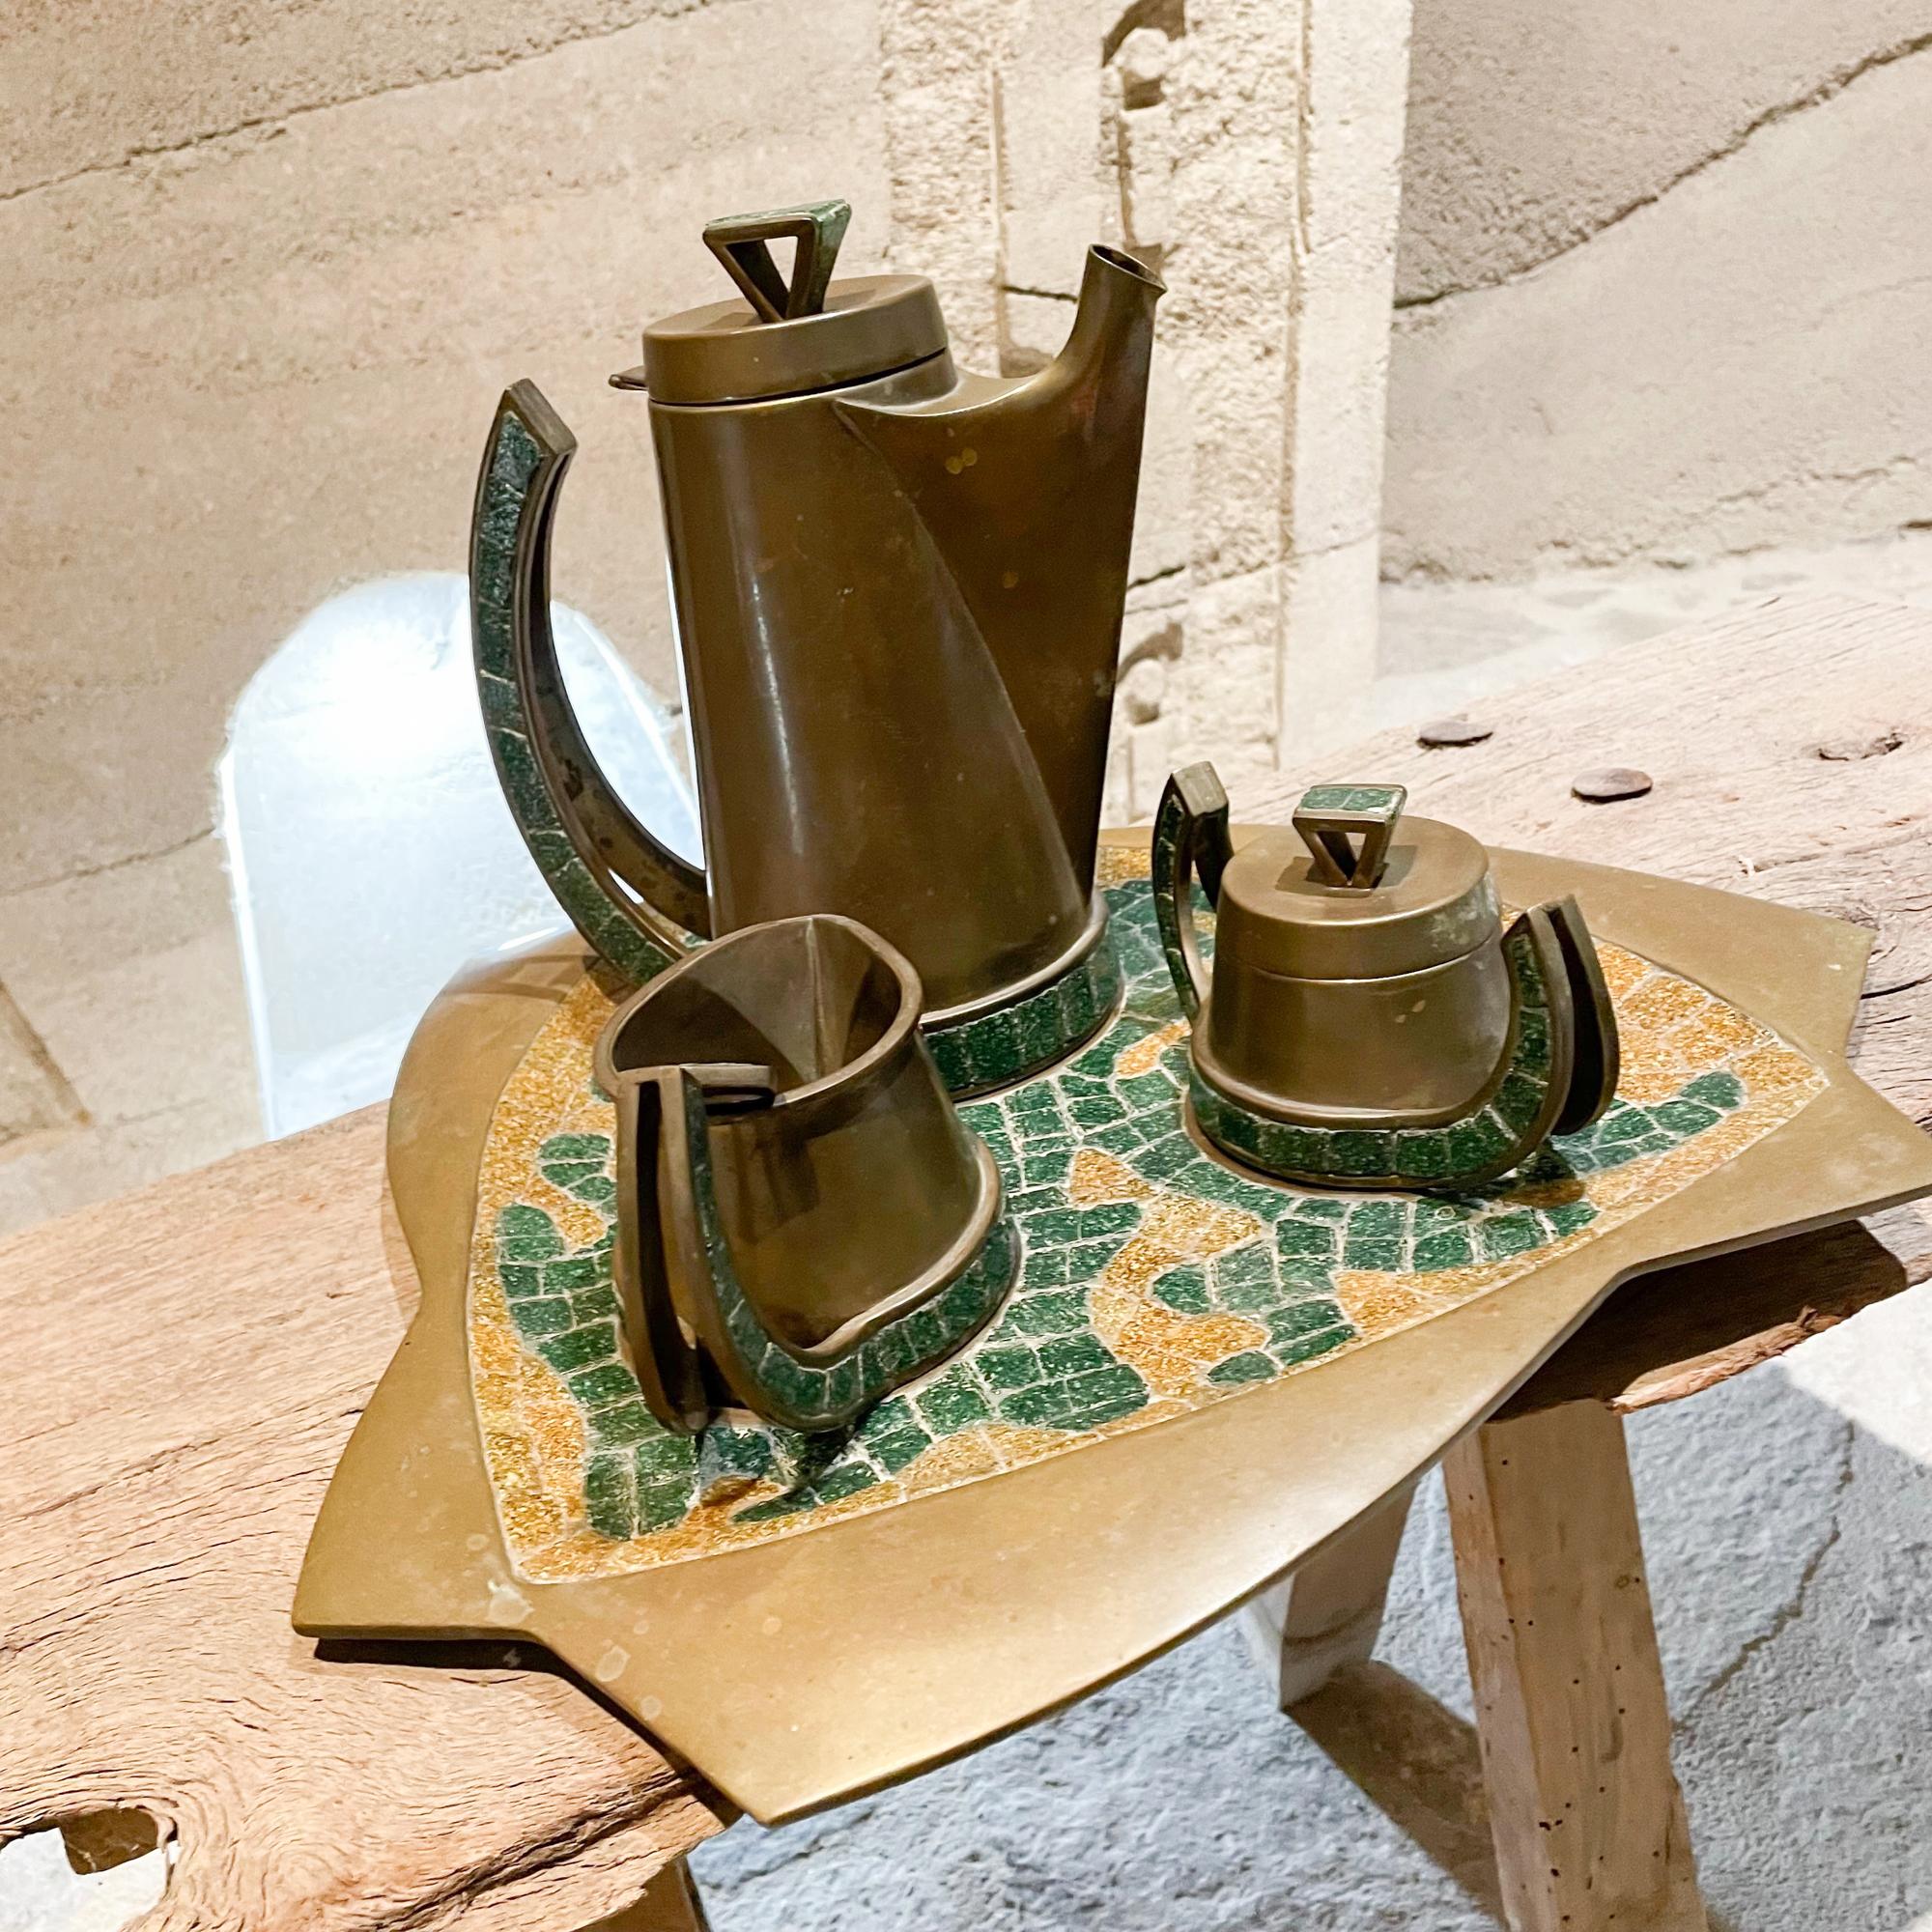 AMBIANIC presents:
Fabulous handwrought Made in Mexico by Salvador Teran Coffee Tea Set- Spoon & Serving Tray.
Five piece Set. Tray included.
Handcrafted in patinated Brass with exquisite Turquoise Stone Tile Mosaic.
Set Includes: 
1.Coffee Pot: